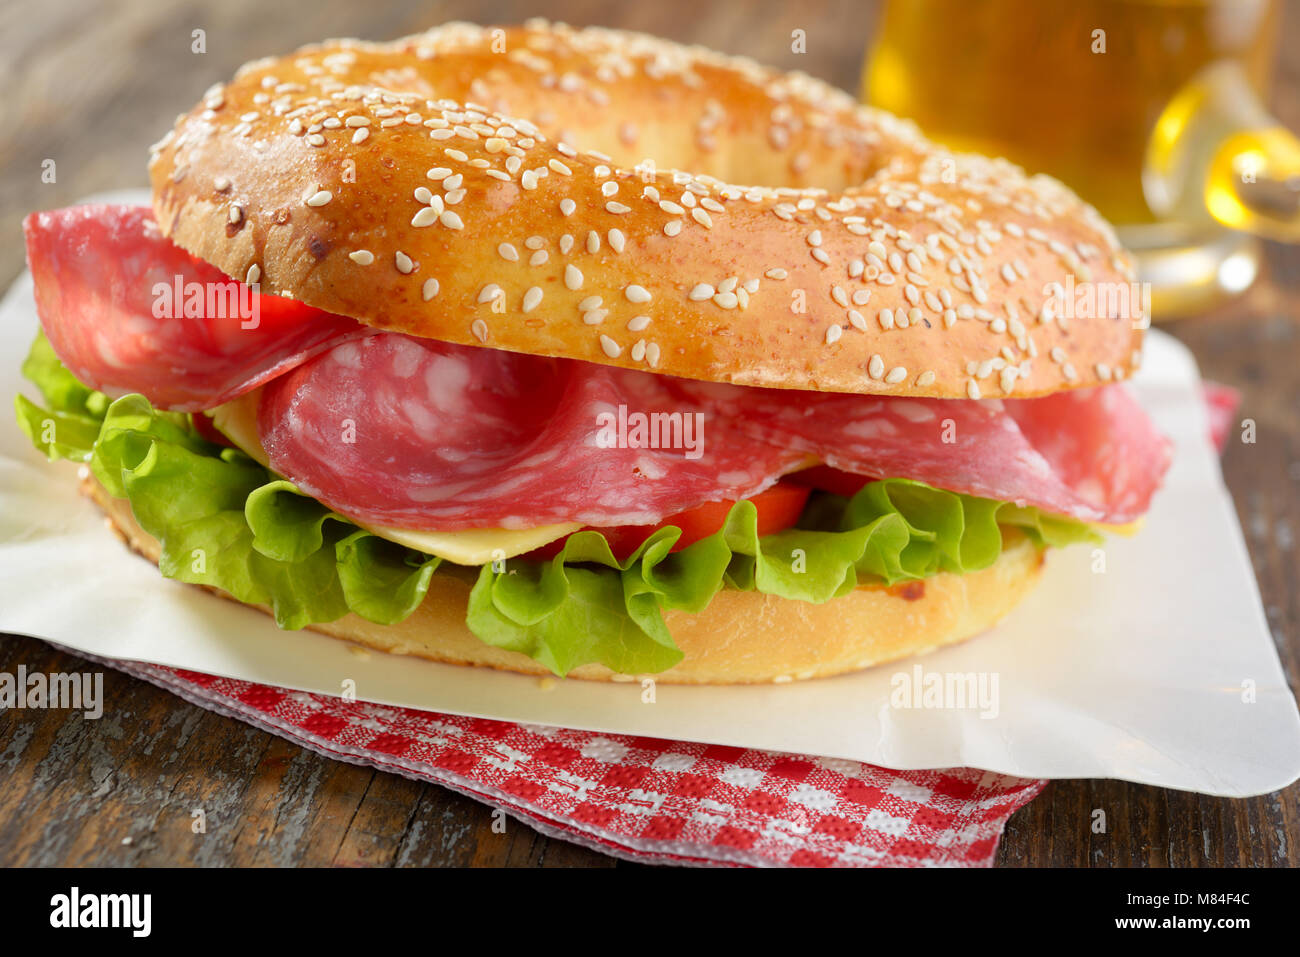 Bagel sandwich with sausage, cheese, and lettuce Stock Photo